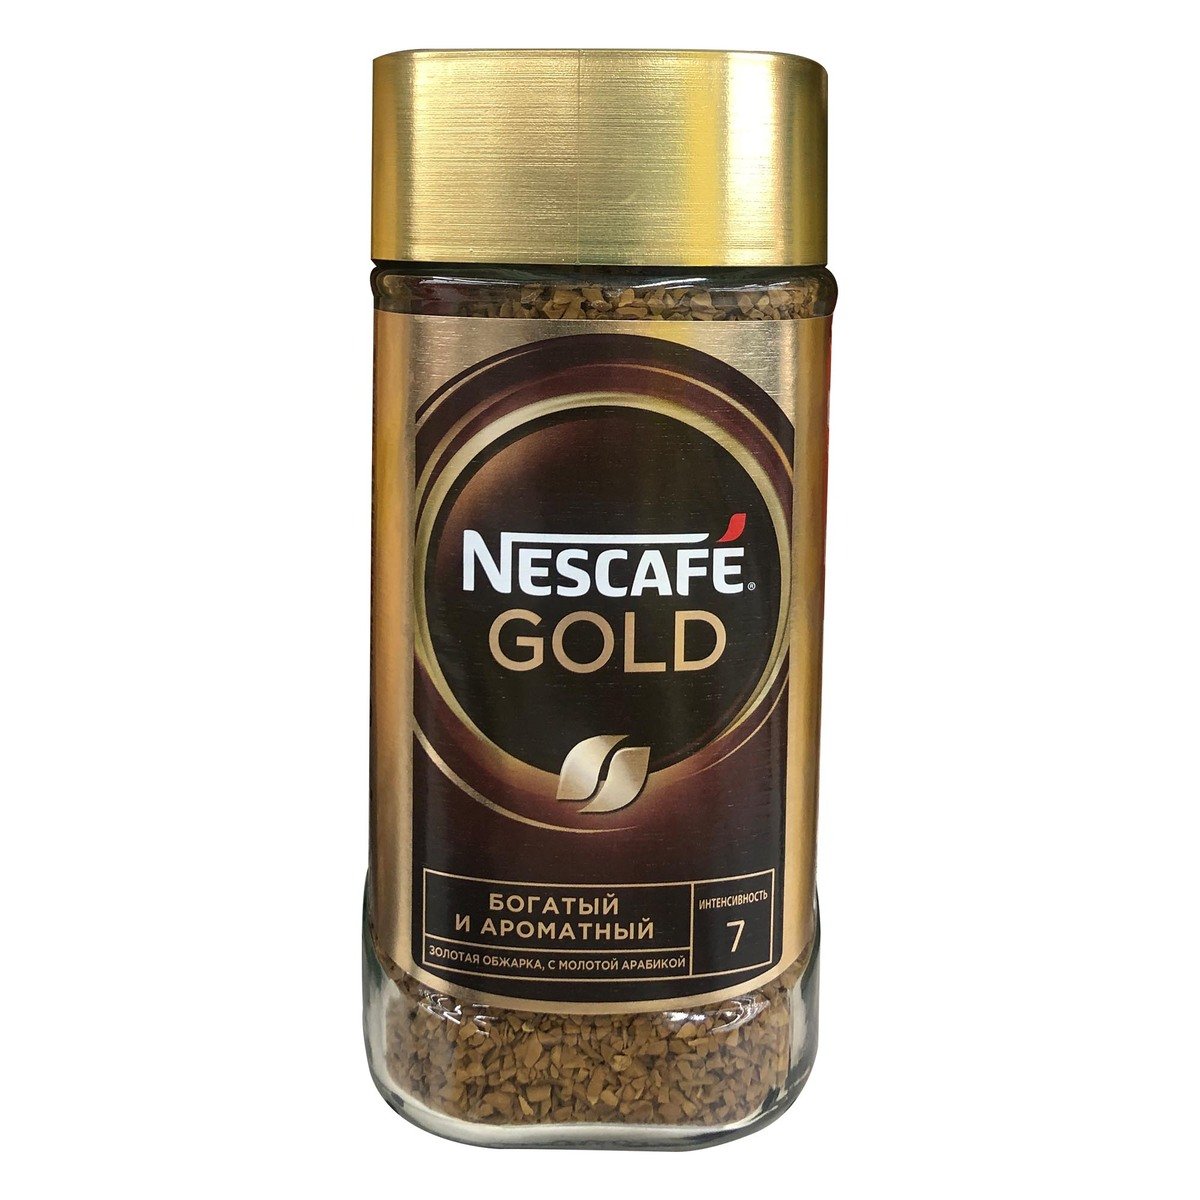 Buy Nescafe Ice Classic 25g Online - Shop Beverages on Carrefour UAE